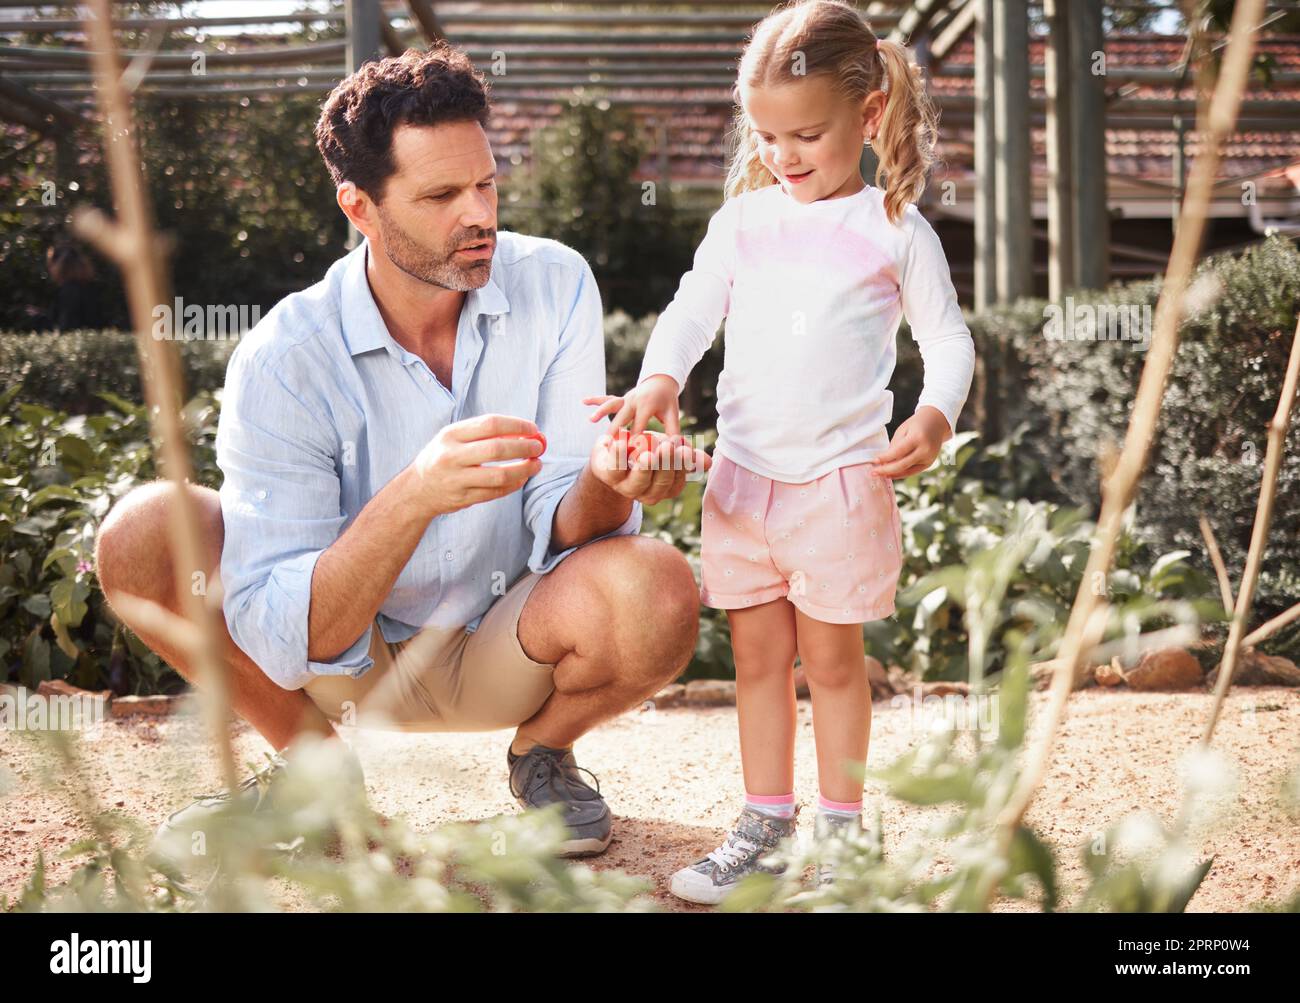 Family, tomato garden or girl with father in learning or child education for food growth, sustainability or environment agriculture. Smile, happy or bonding kid with man farming vegetable for harvest Stock Photo